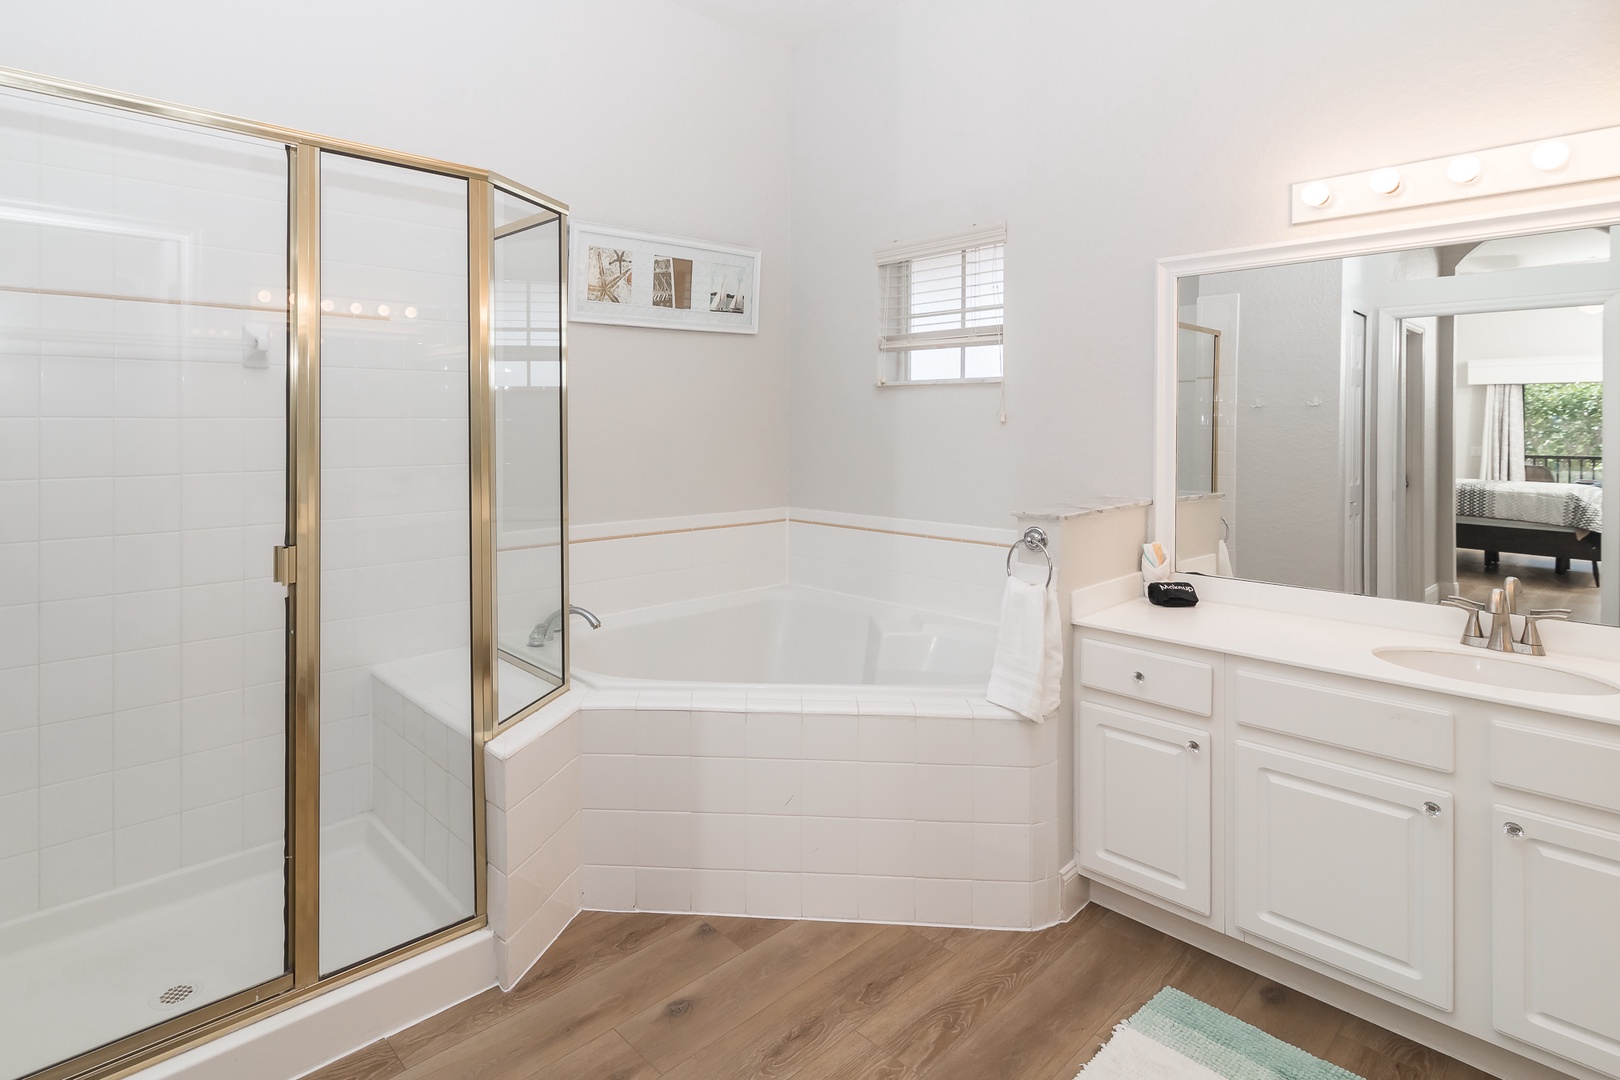 Take a bubble bath in the jacuzzi bathtub or enjoy the standup shower